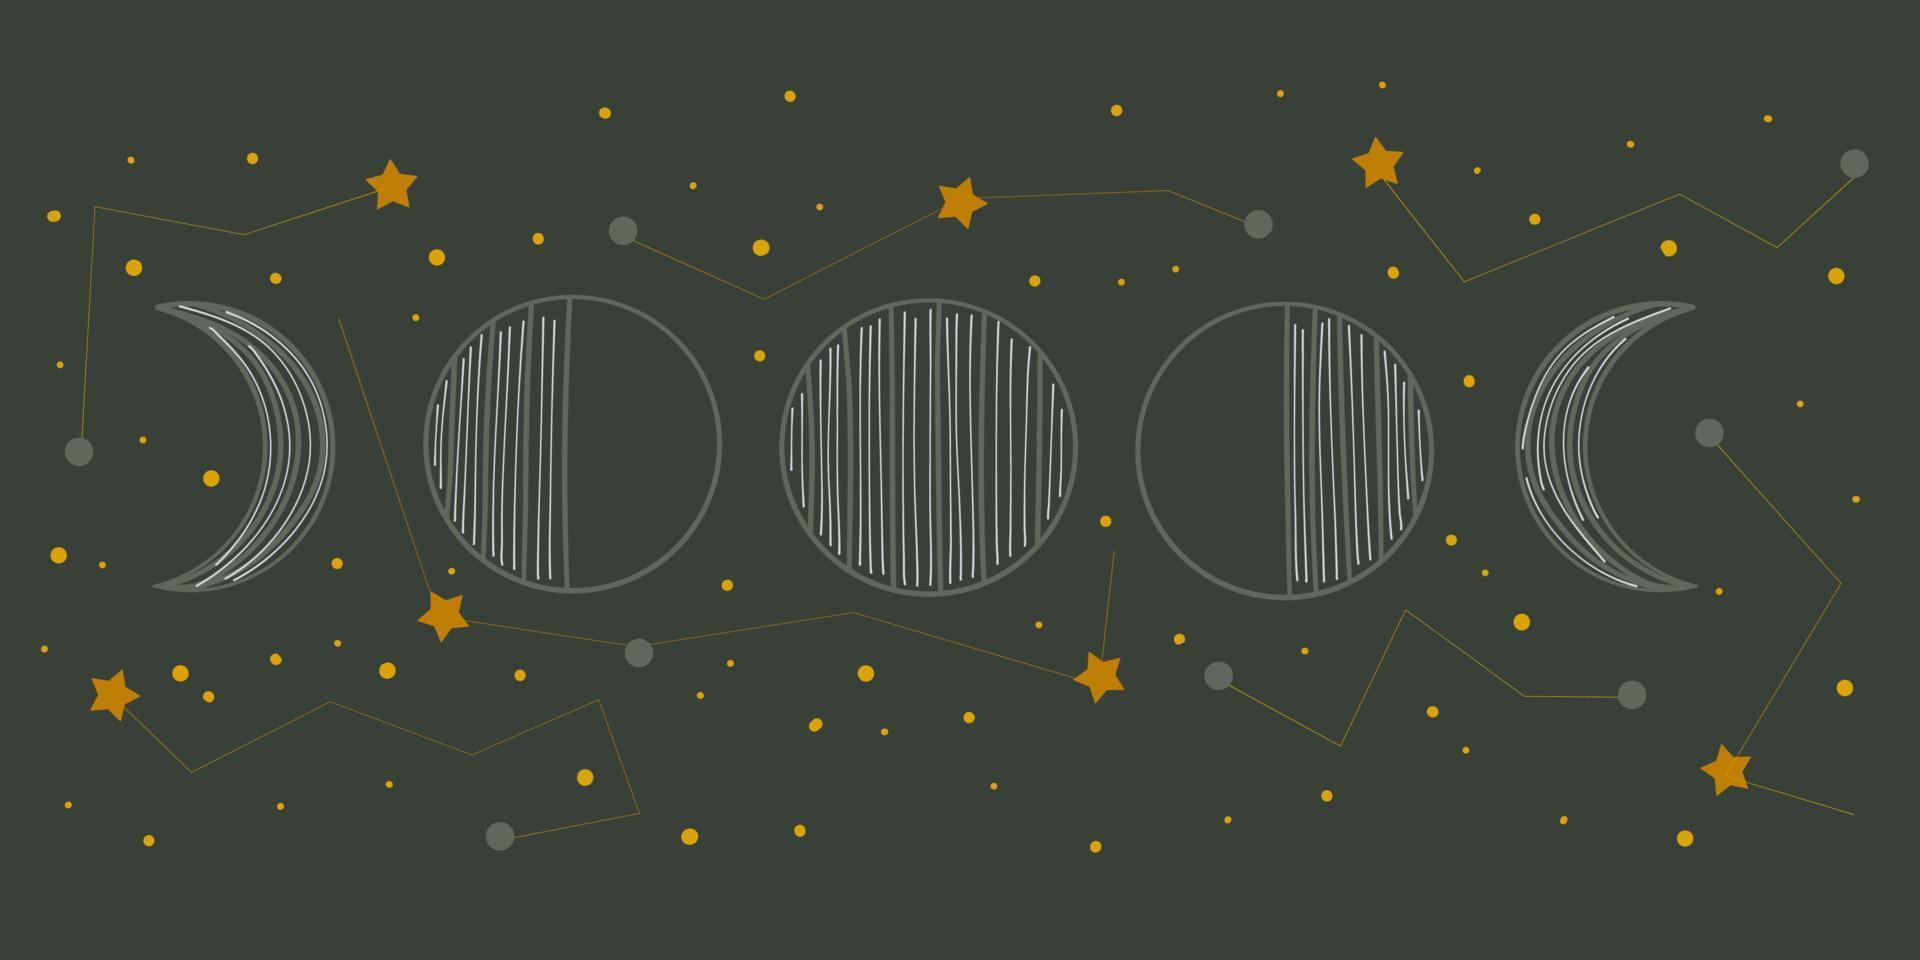 Moon phases with constellations of the zodiac in vintage style on a dark background. Changing moon with stars in the sky. Spiritual celestial astrology. Flat vector illustration banner